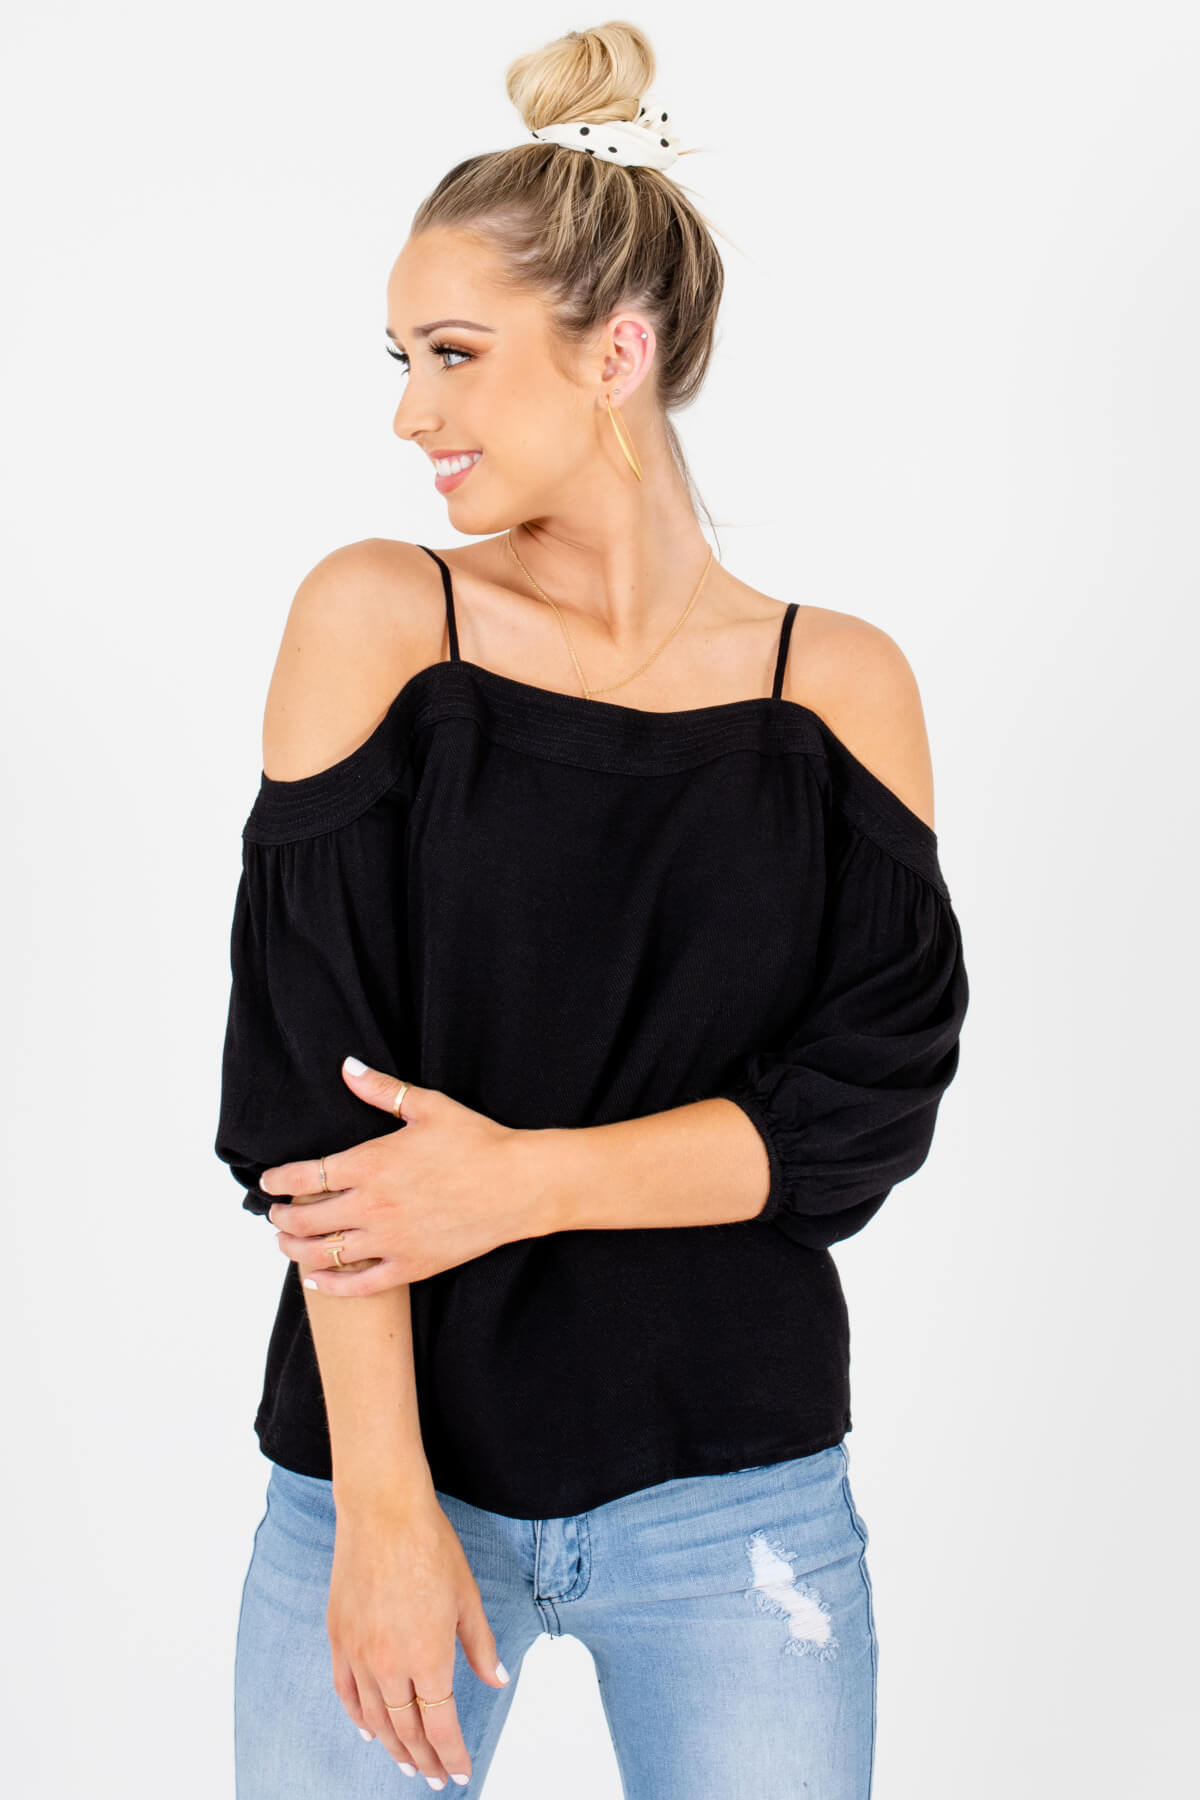 Black Pleated Accented Boutique Cold Shoulder Tops for Women